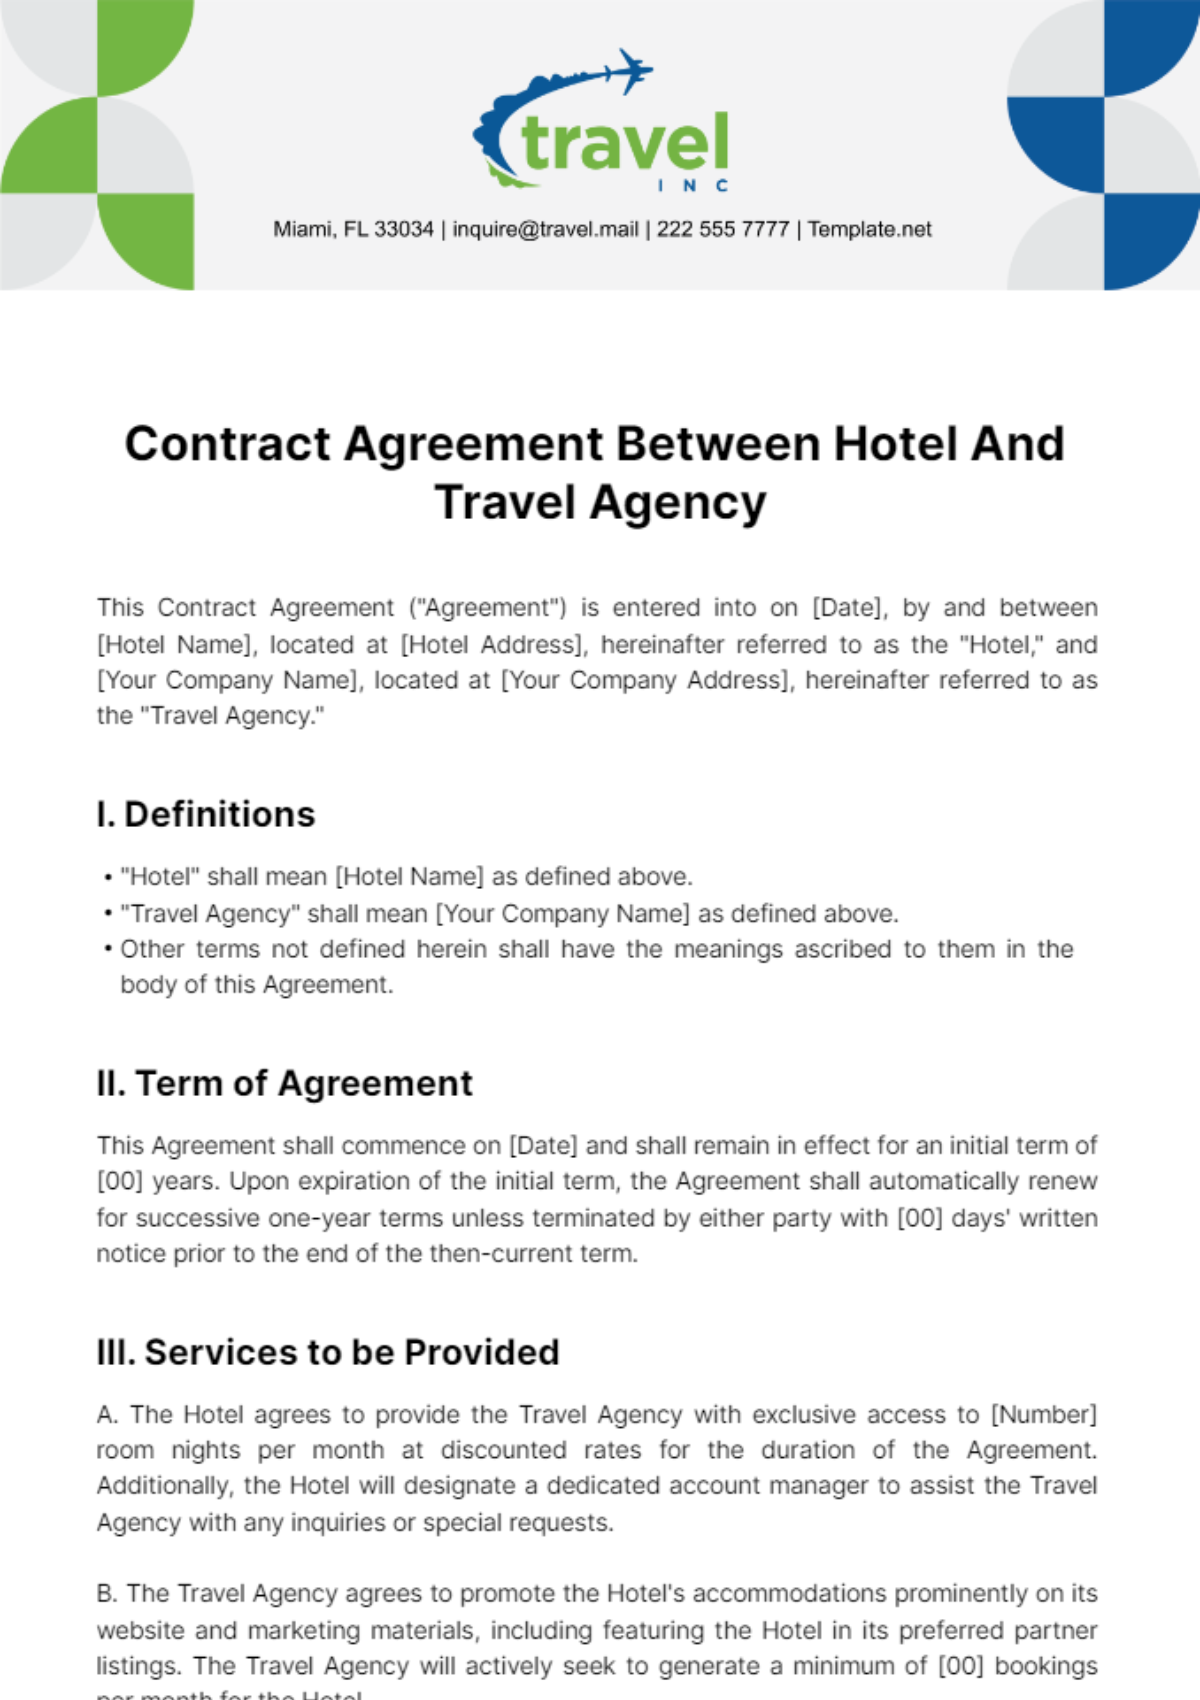 Free Contract Agreement Between Hotel And Travel Agency Template